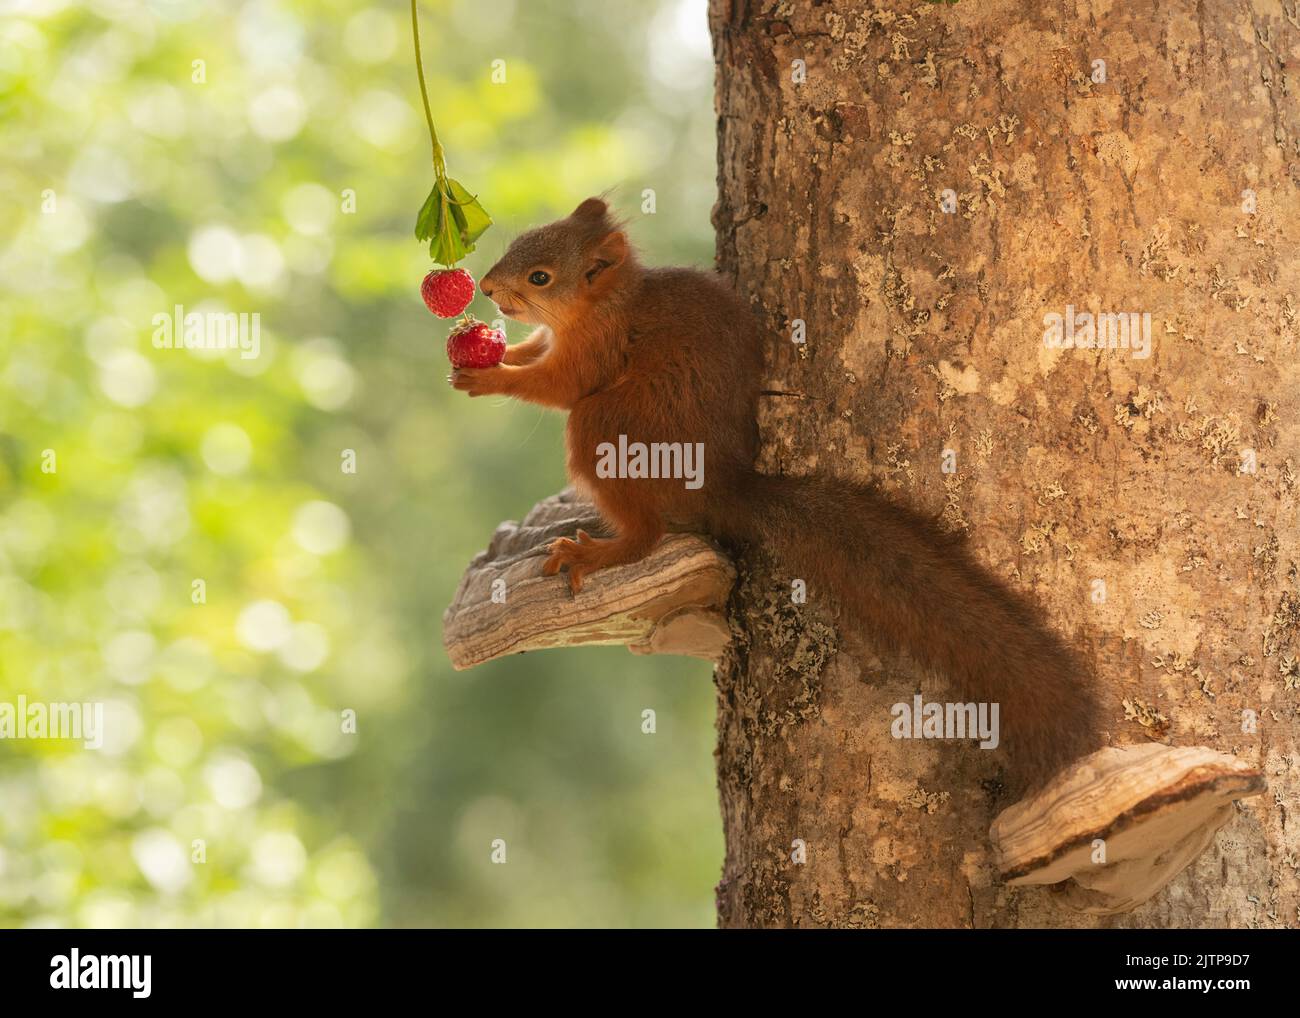 young red squirrel is eating a strawberry Stock Photo